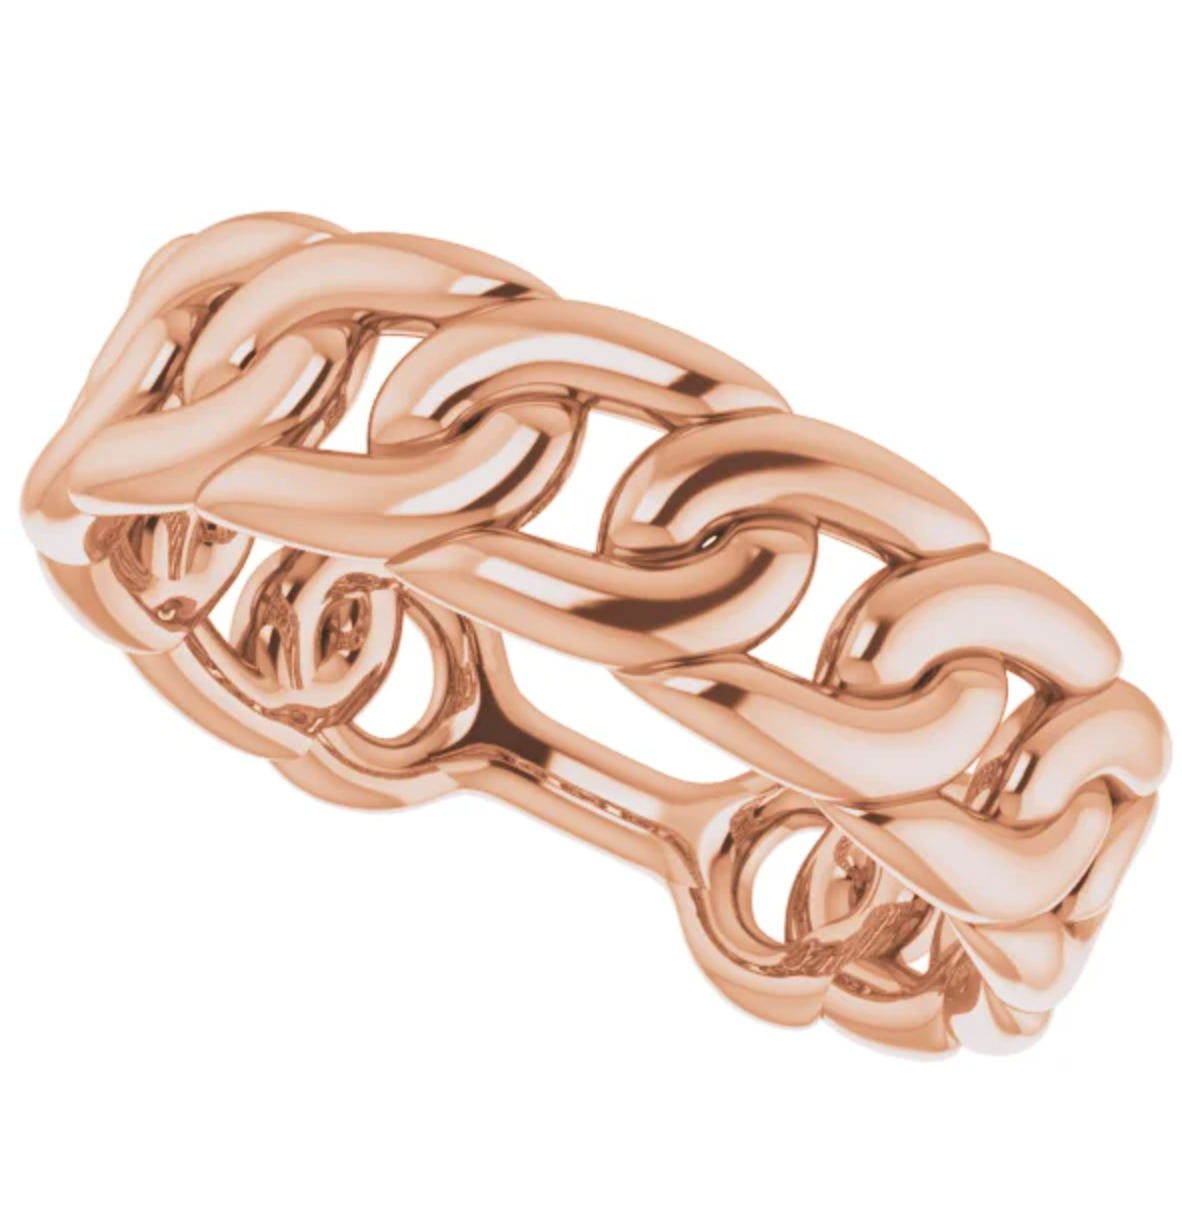 Chain Link Stackable Ring